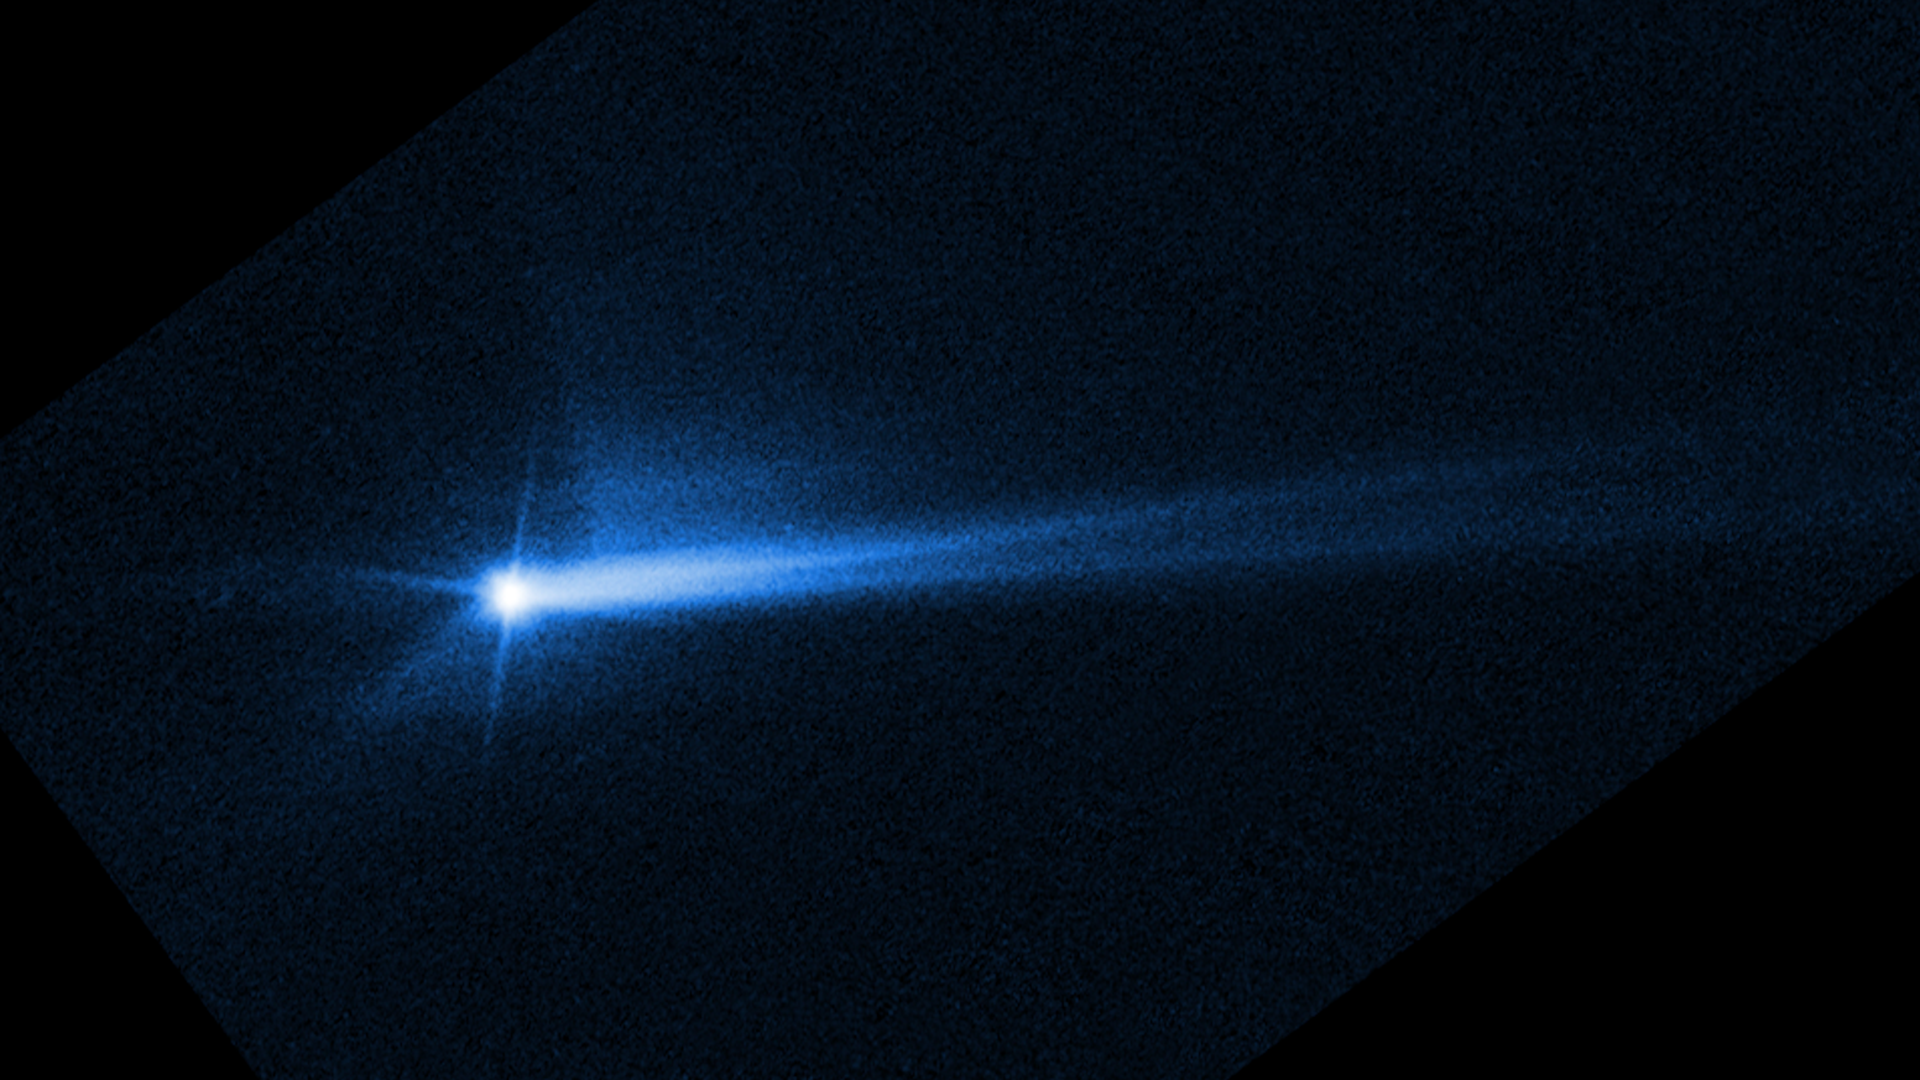 Debris blasted off of the asteroid Dimorphos as seen by the Hubble Space Telescope. Photo: NASA/ESA/STScI/Hubble